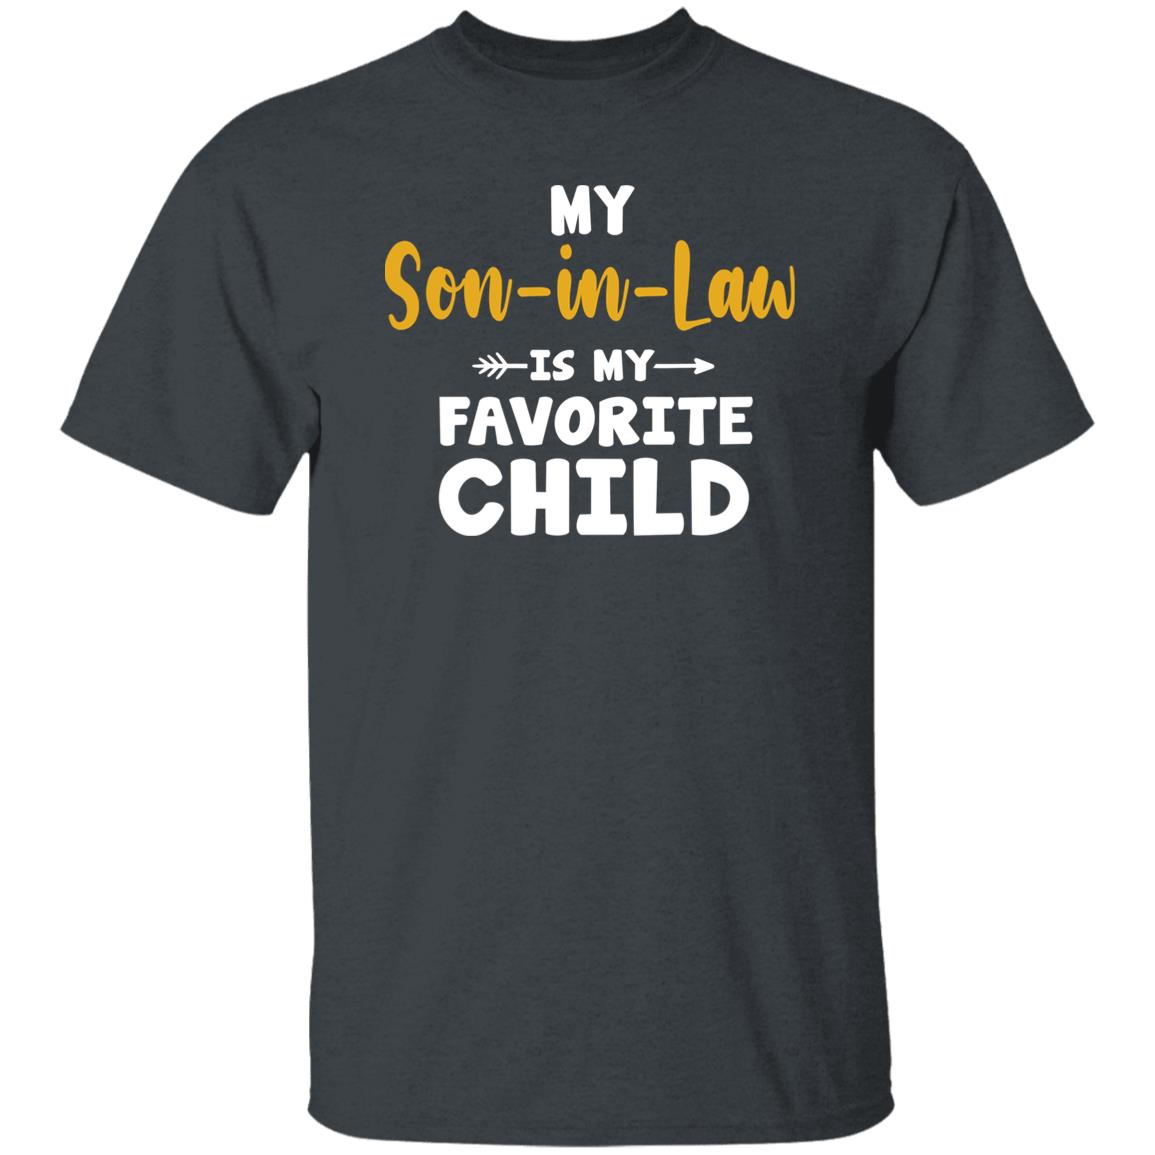 My Son-in-Law is My Favorite Child For Mother-in-Law Shirt